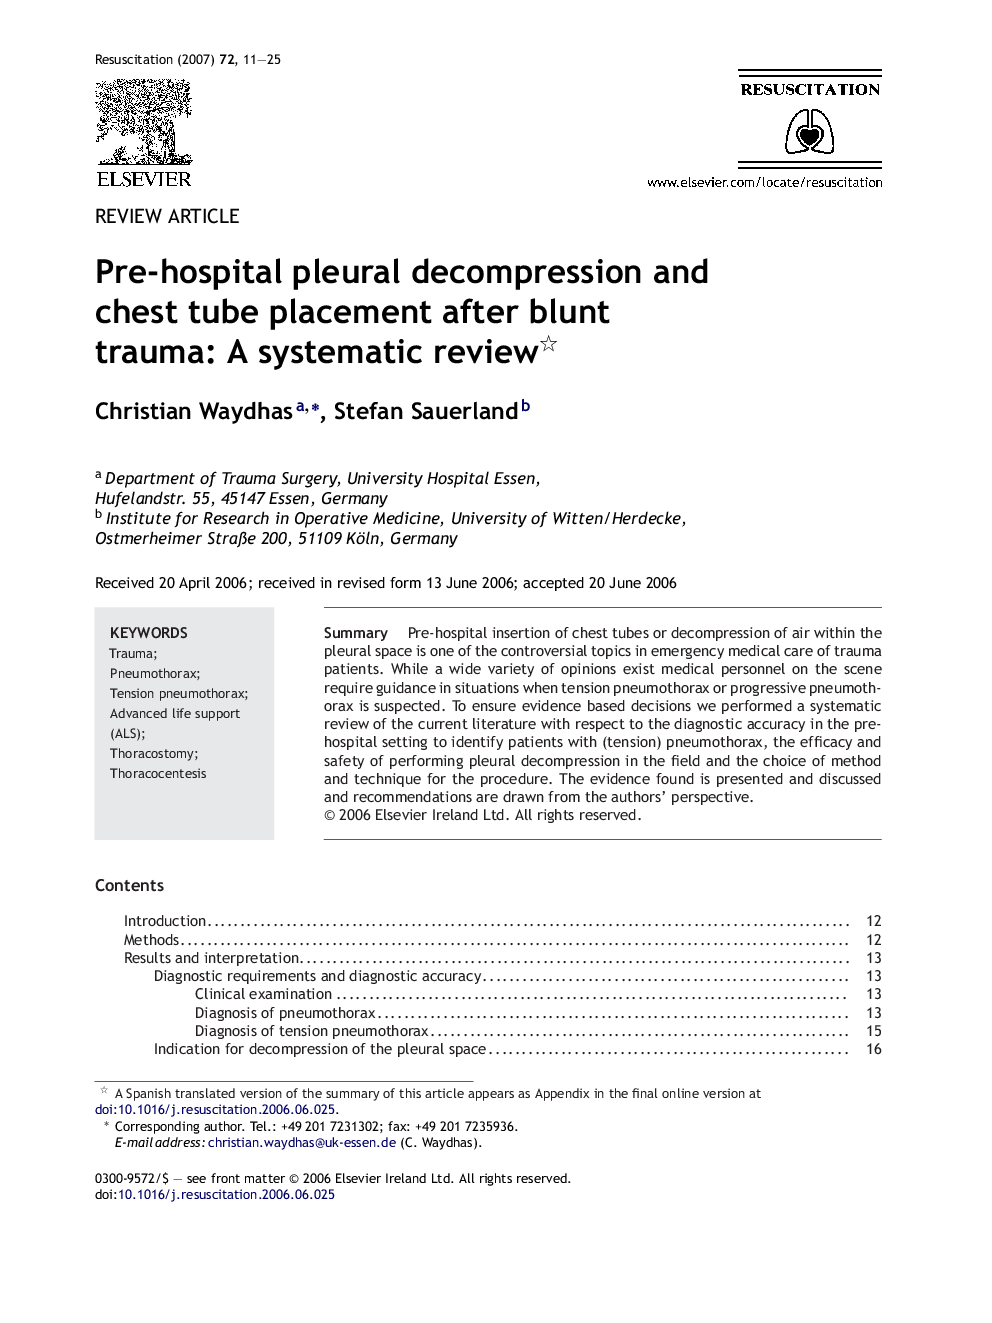 Pre-hospital pleural decompression and chest tube placement after blunt trauma: A systematic review 